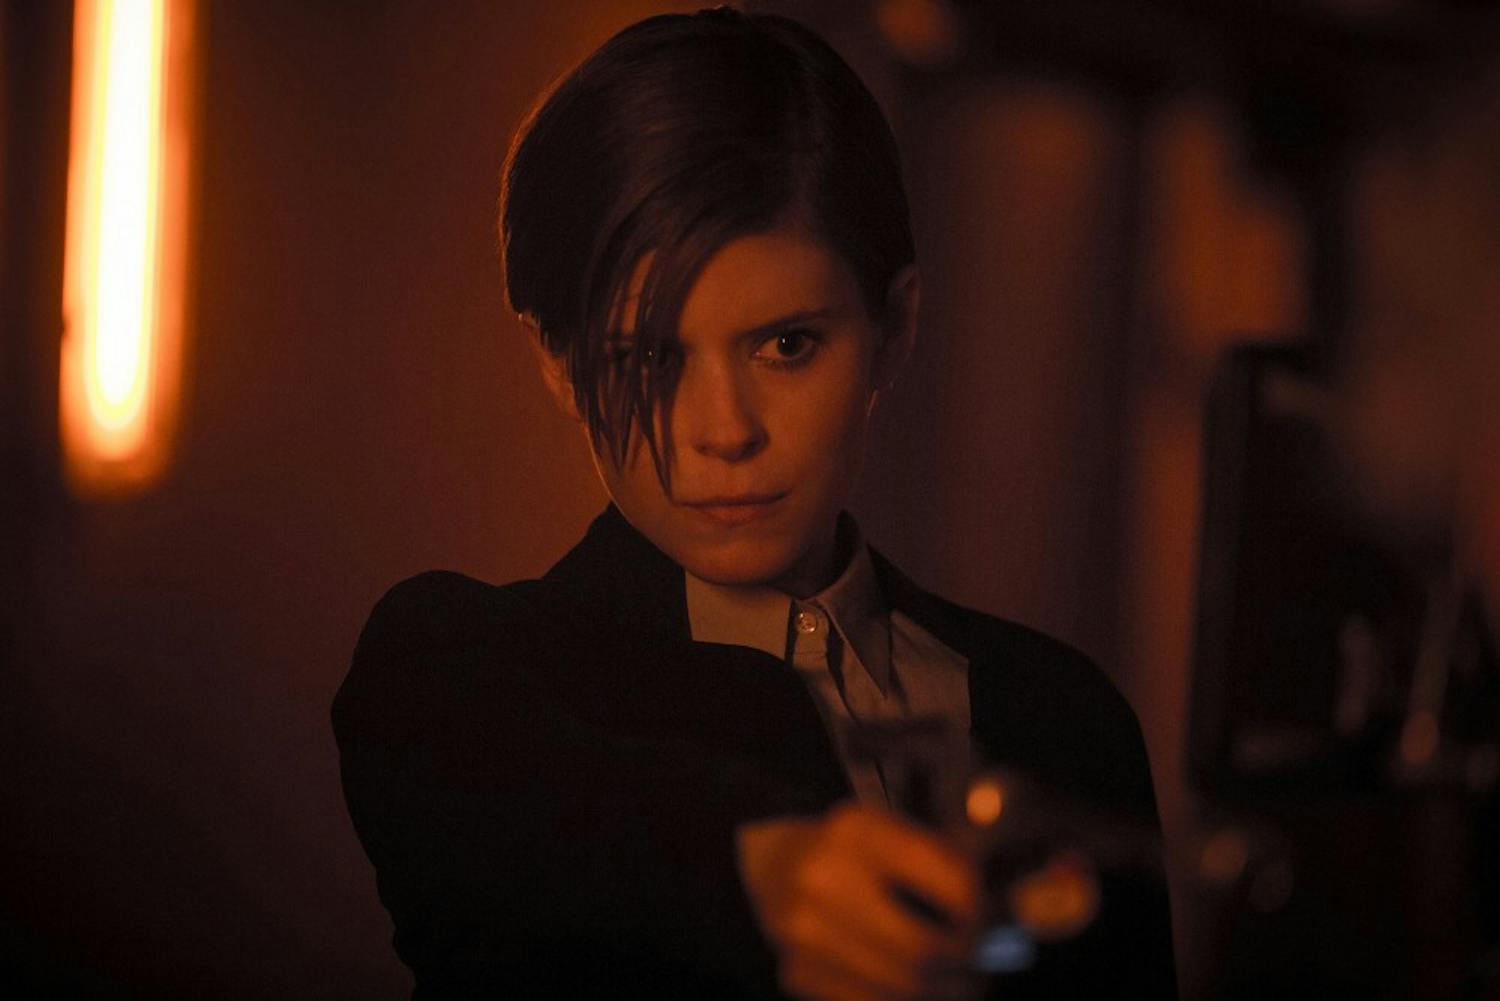 Kate Mara as Lee Weathers in the movie "Morgan" portrays a corporate troubleshooter whose investigation of a seemingly innocent human named Morgan, suddenly takes a dangerous turn. (Aidan Monaghan/20th Century Fox/TNS)